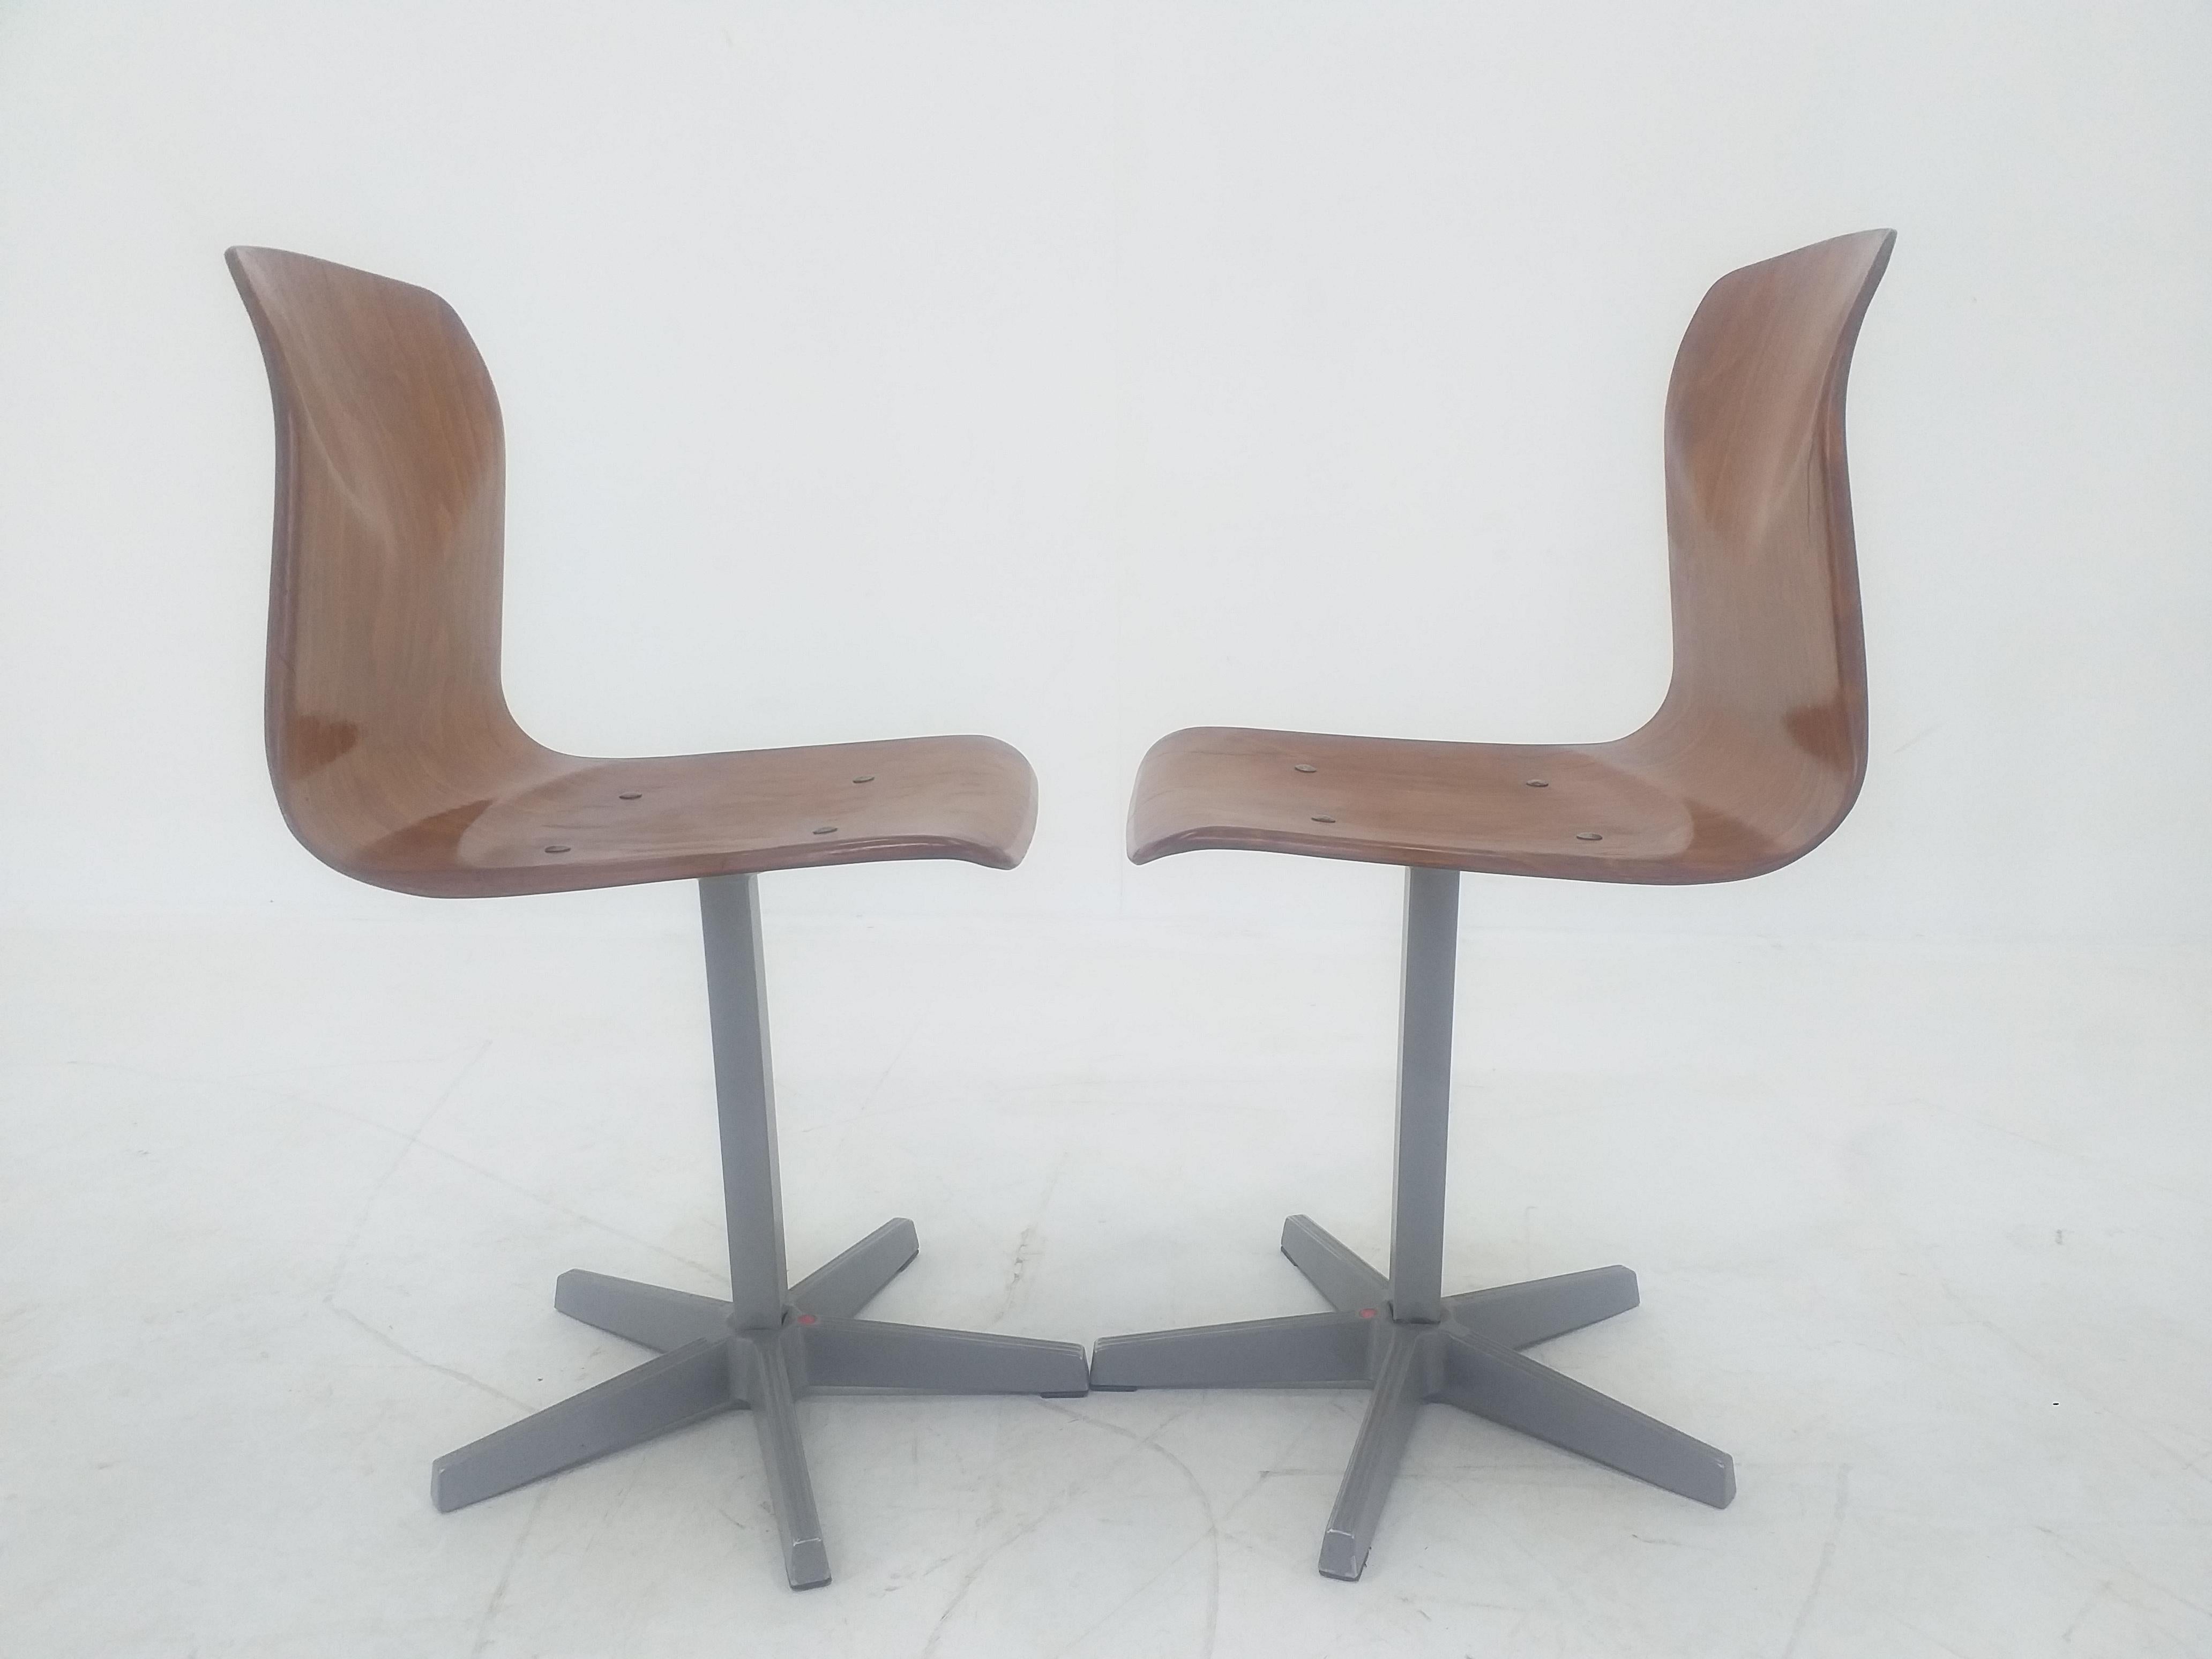 Pair of Midcentury Child's Chairs Pagholz, Germany, 1970s For Sale 4